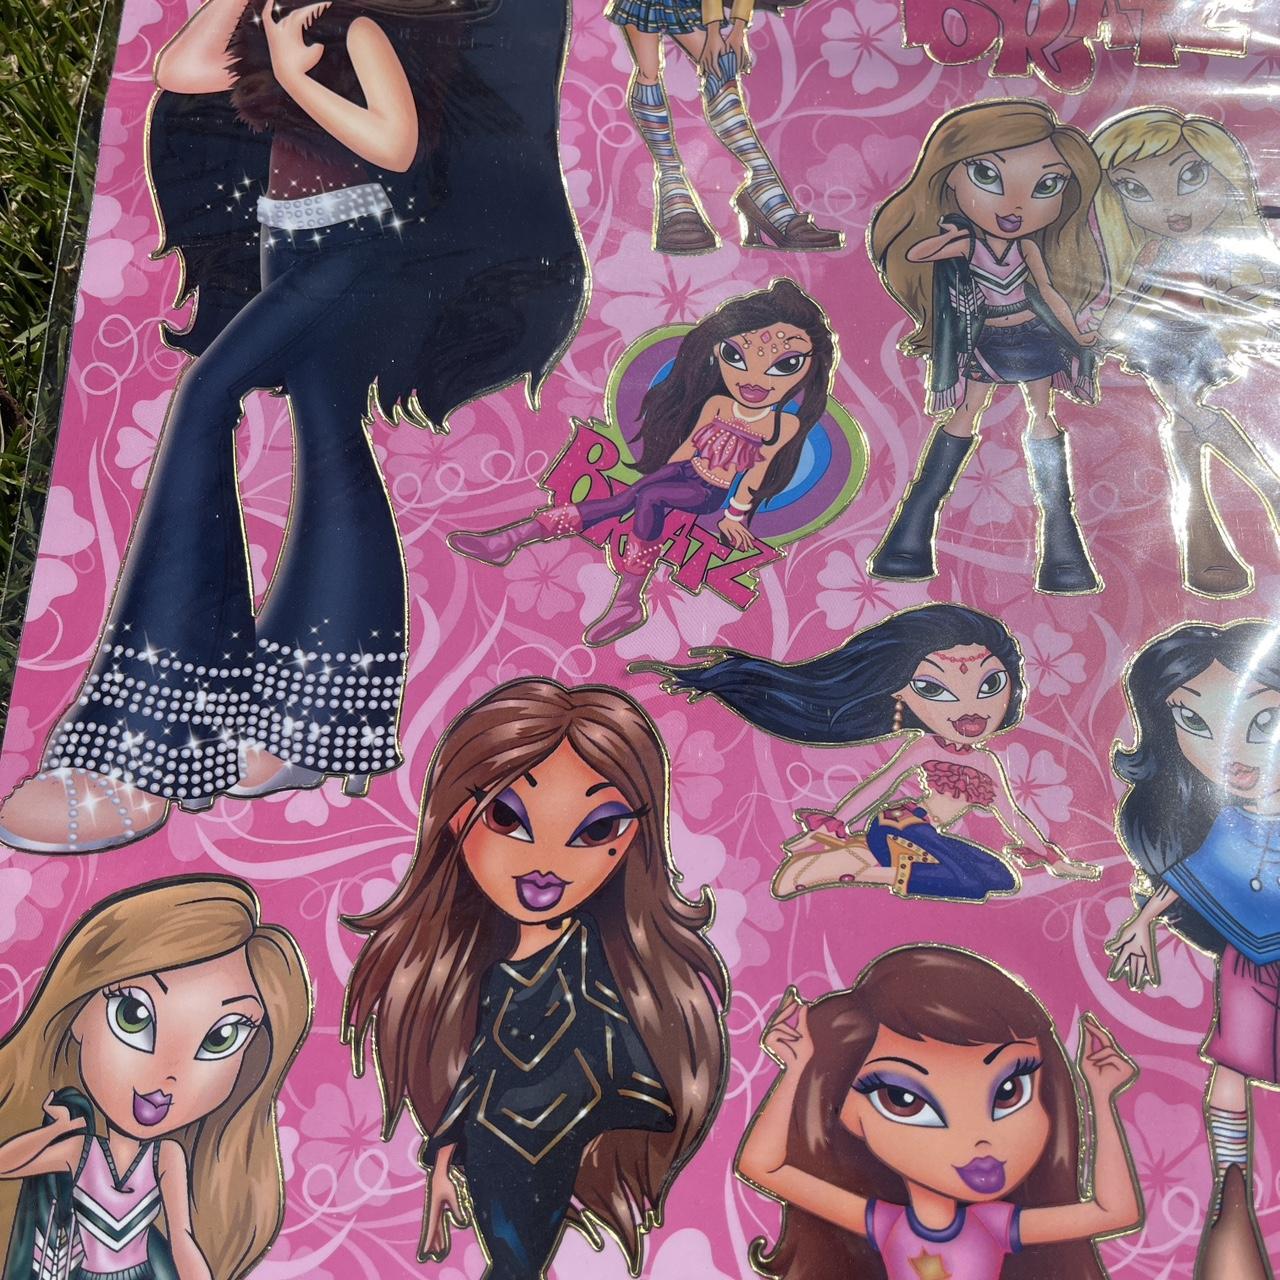 Bratz stickers, 13 stickers total, I have multiple